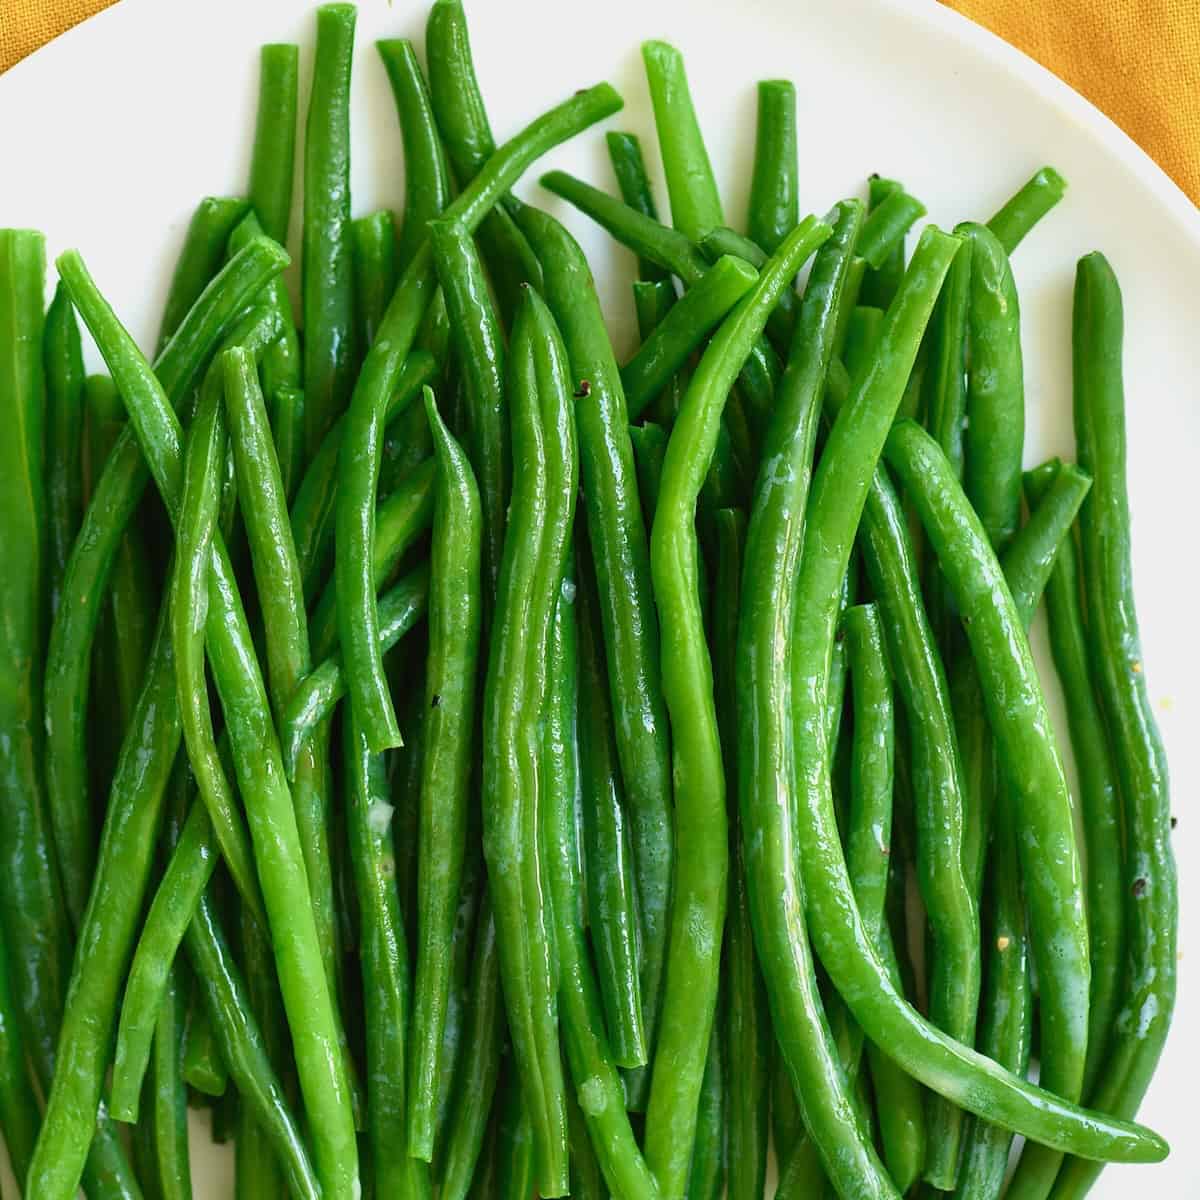 How to Boil Green Beans Perfectly